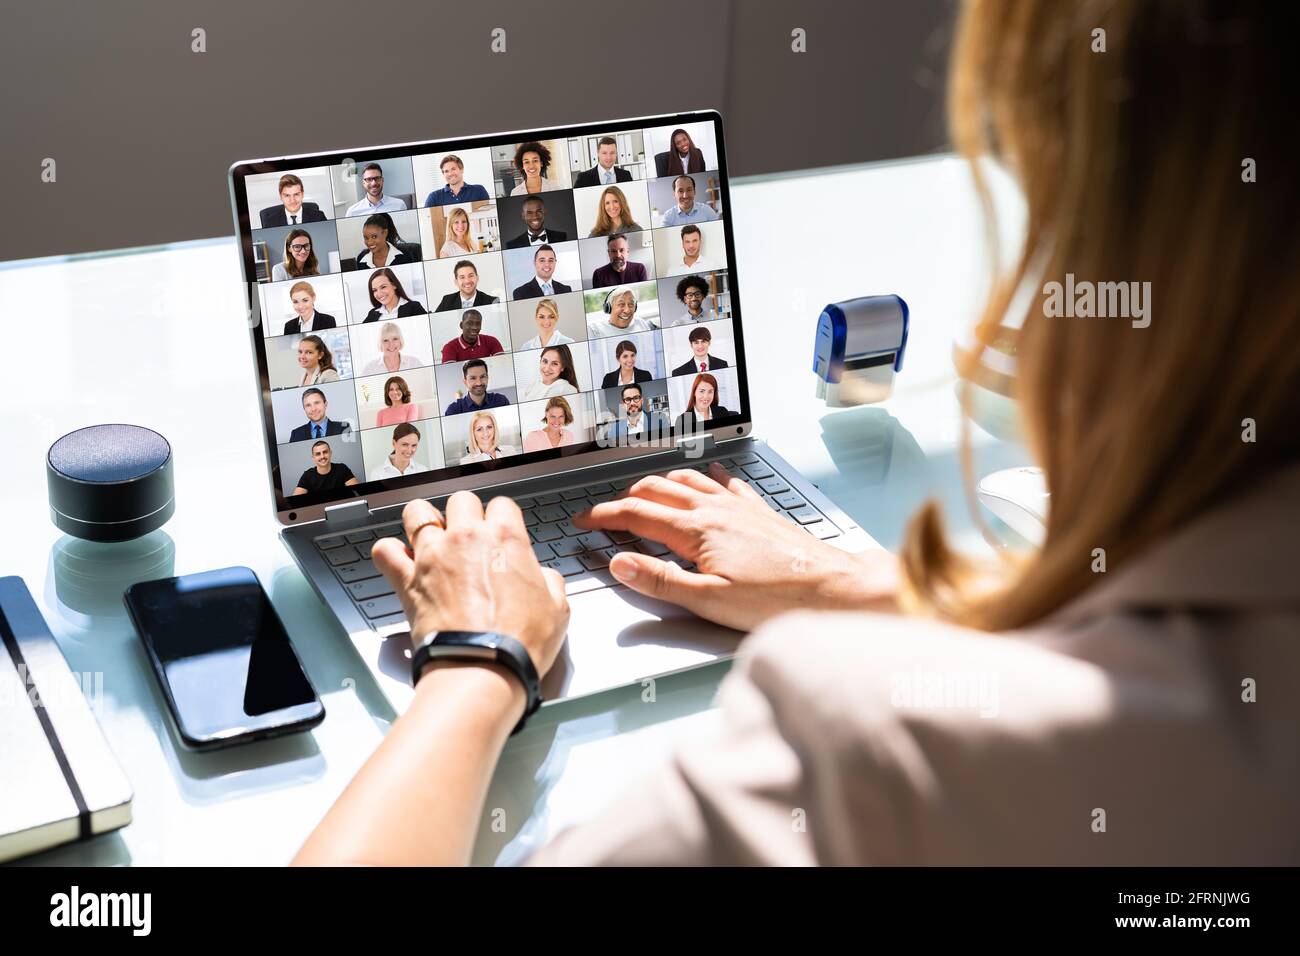 Online Video Conference Webinar Call Or Videoconference Meeting Stock Photo